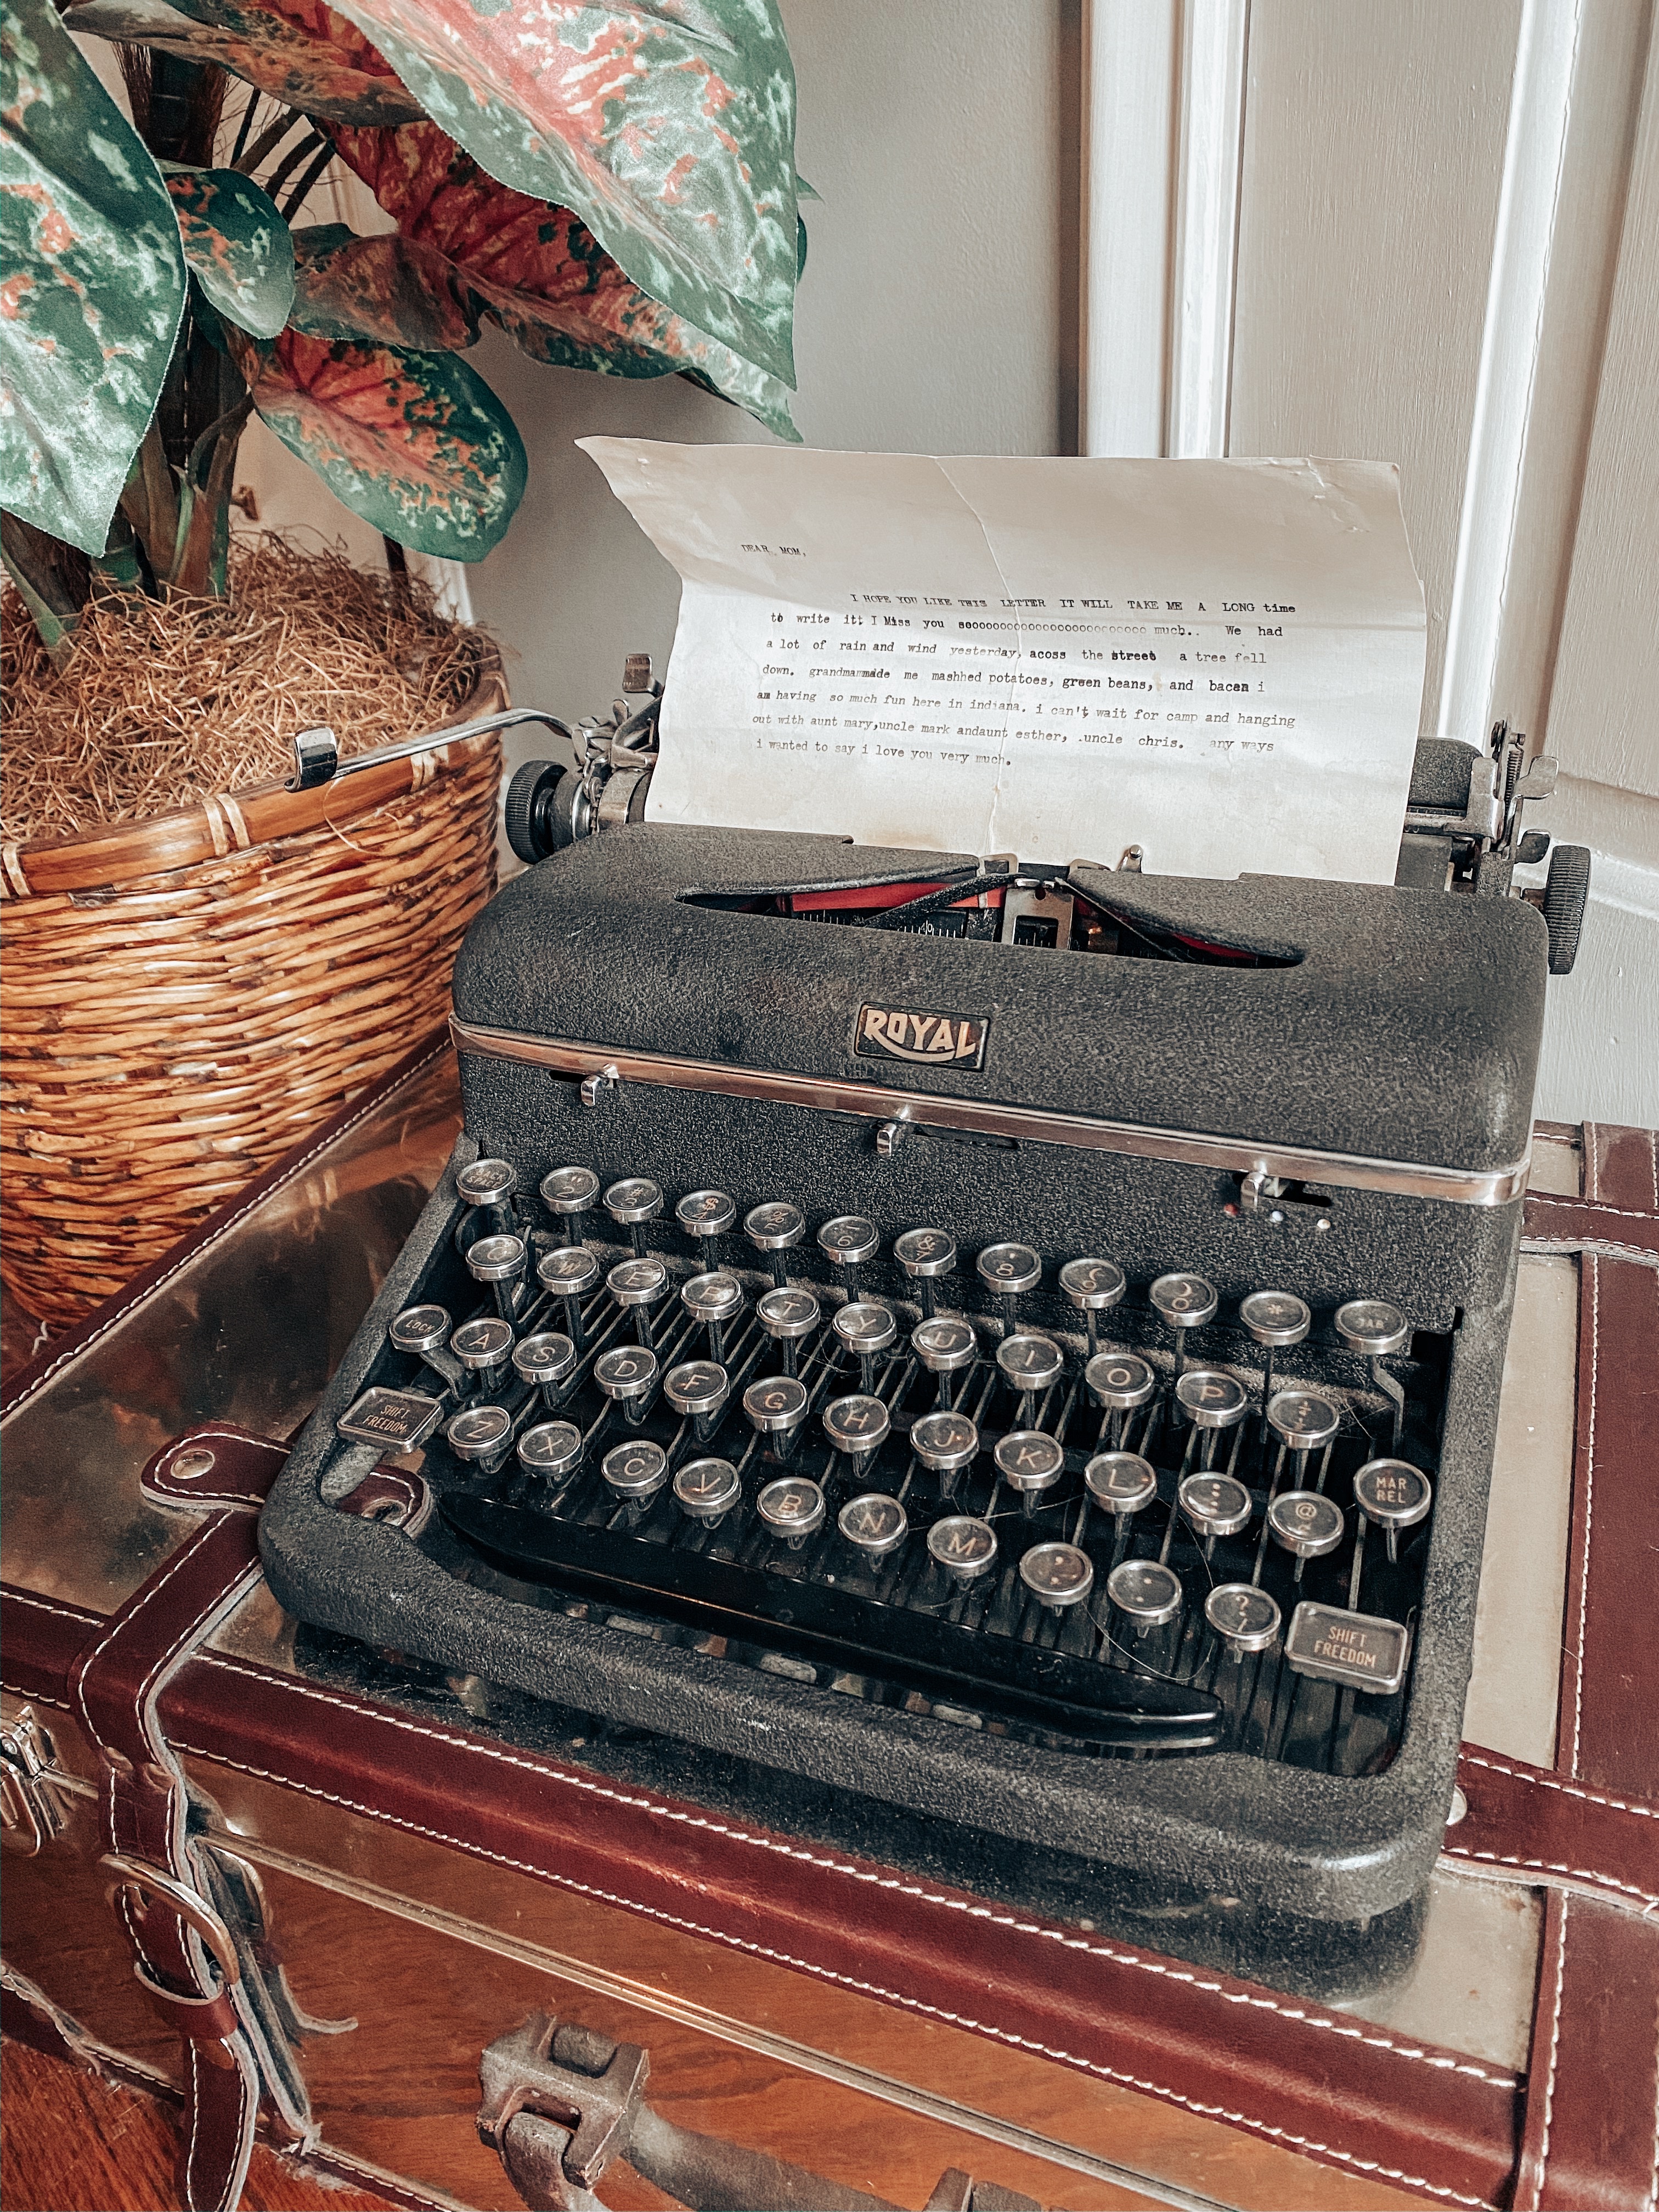 Image of typewriter on a metallic suitcase with a plant in the background.